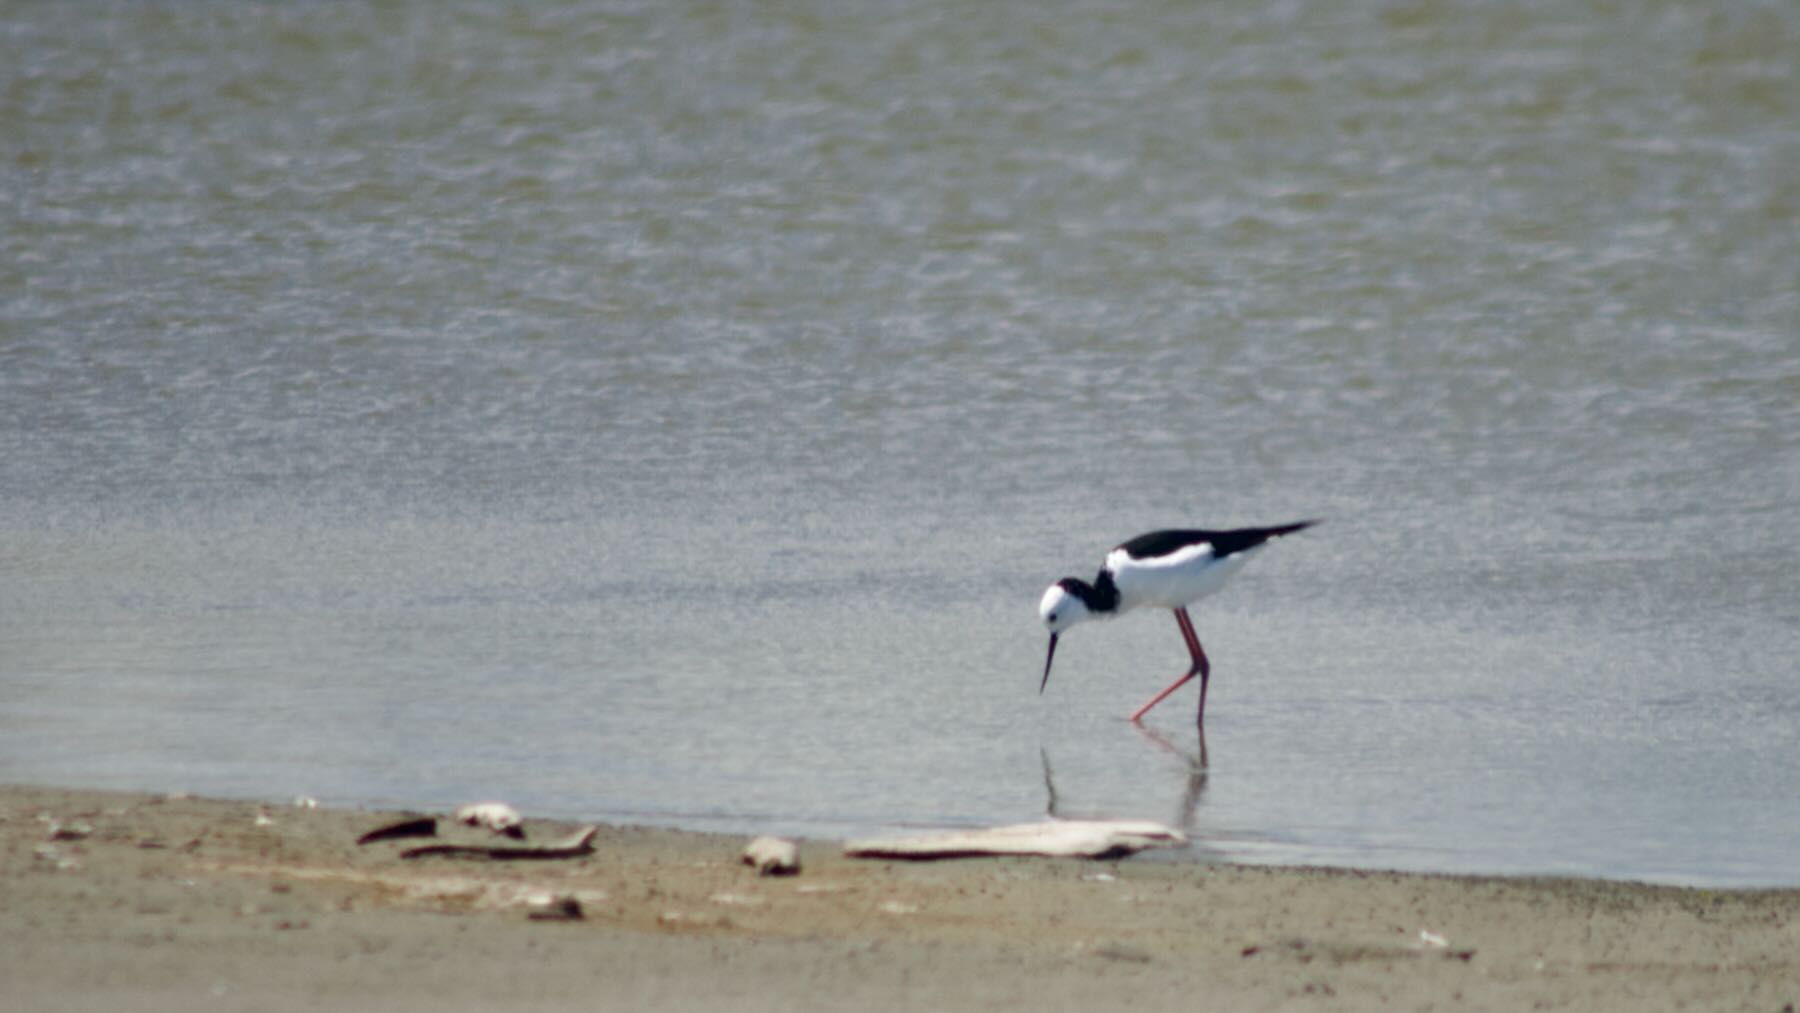 Long-legged black and white bird wading in shallow water. 